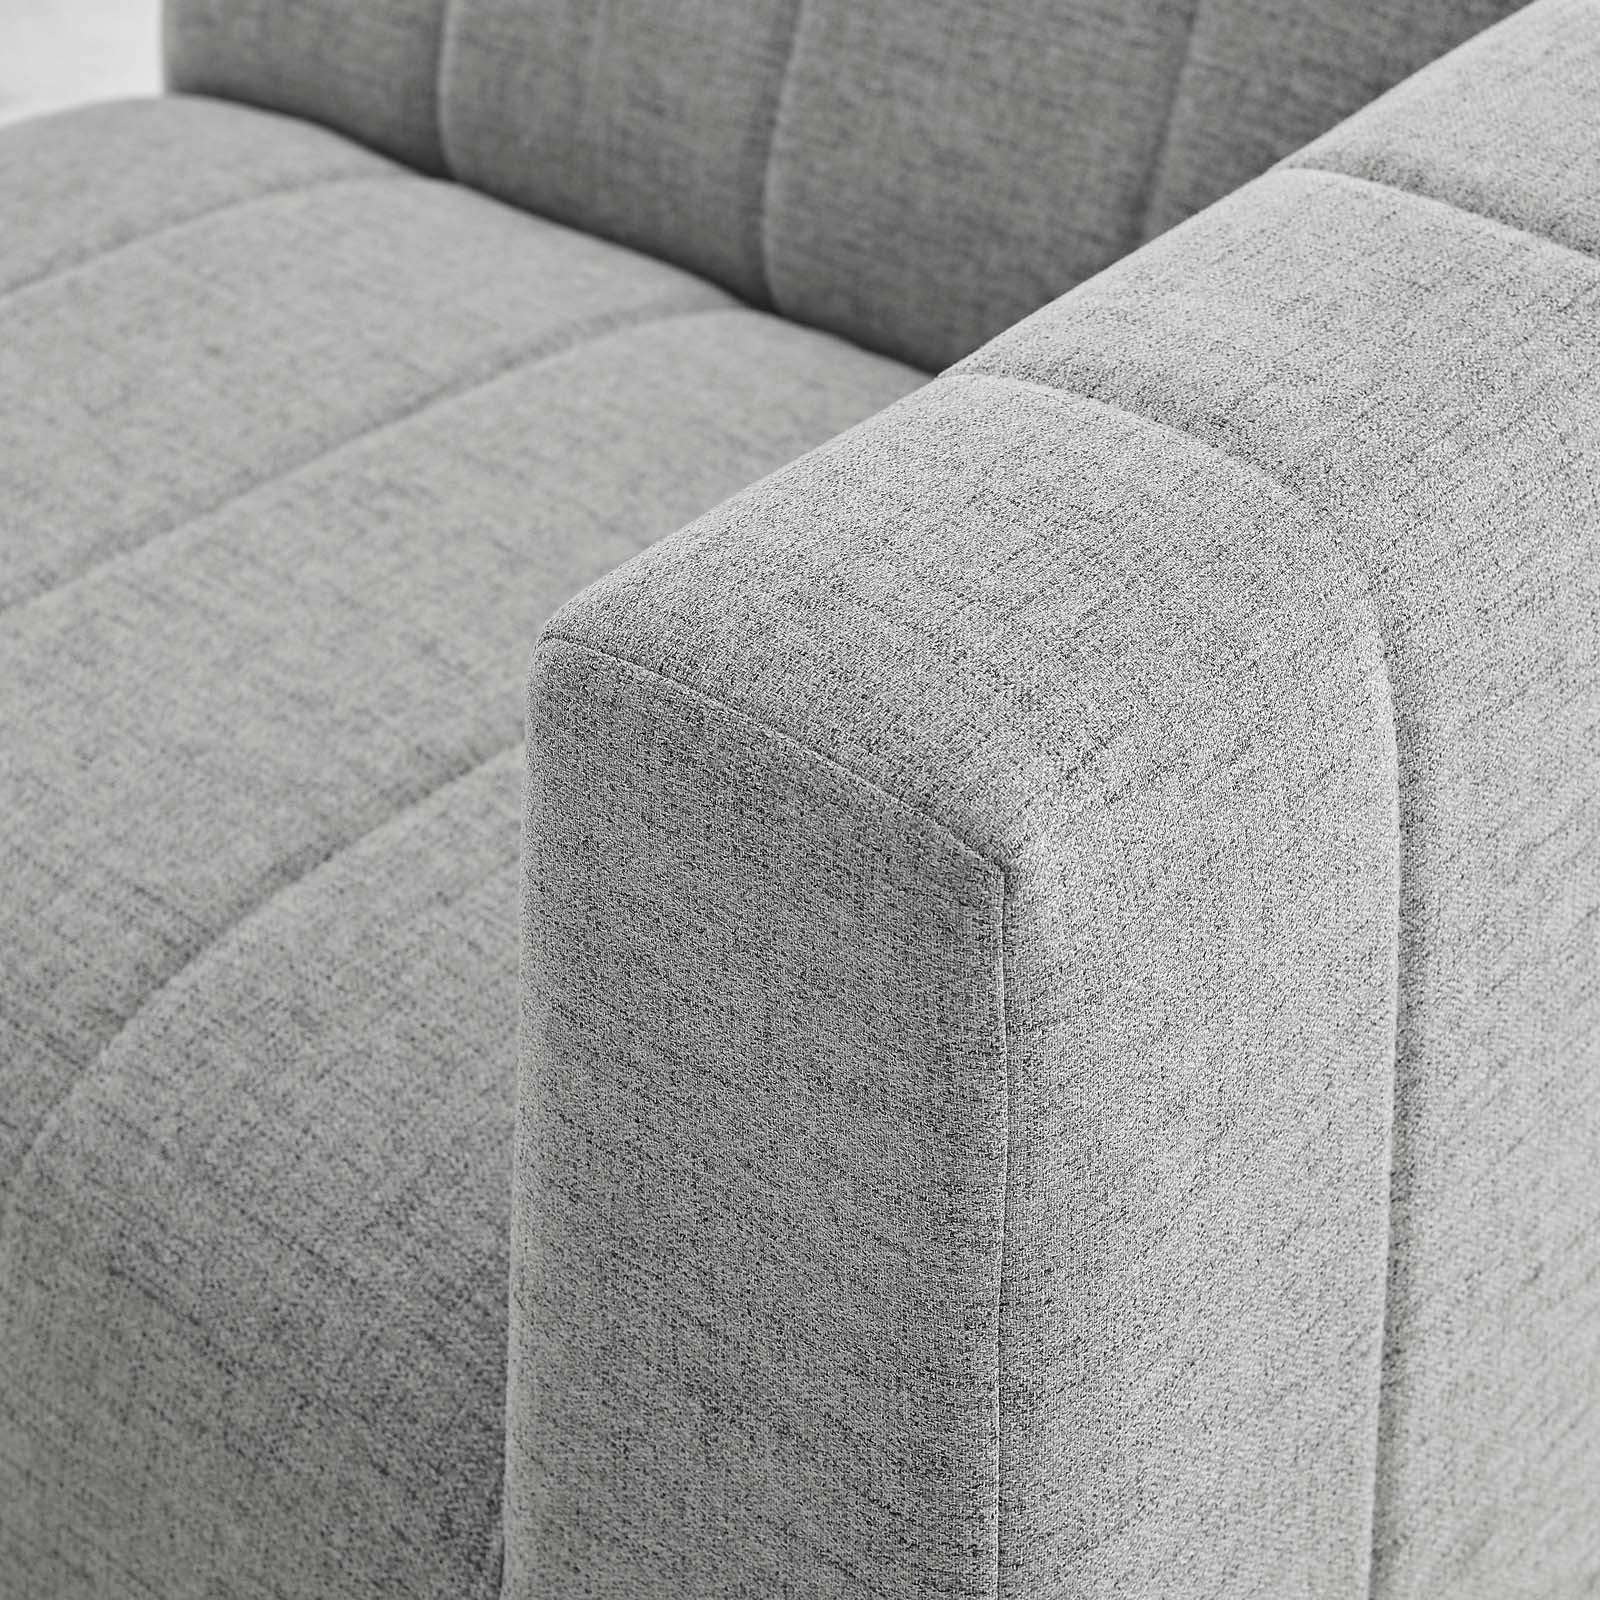 Bartlett Upholstered Fabric Upholstered Fabric 5-Piece Sectional Sofa - East Shore Modern Home Furnishings